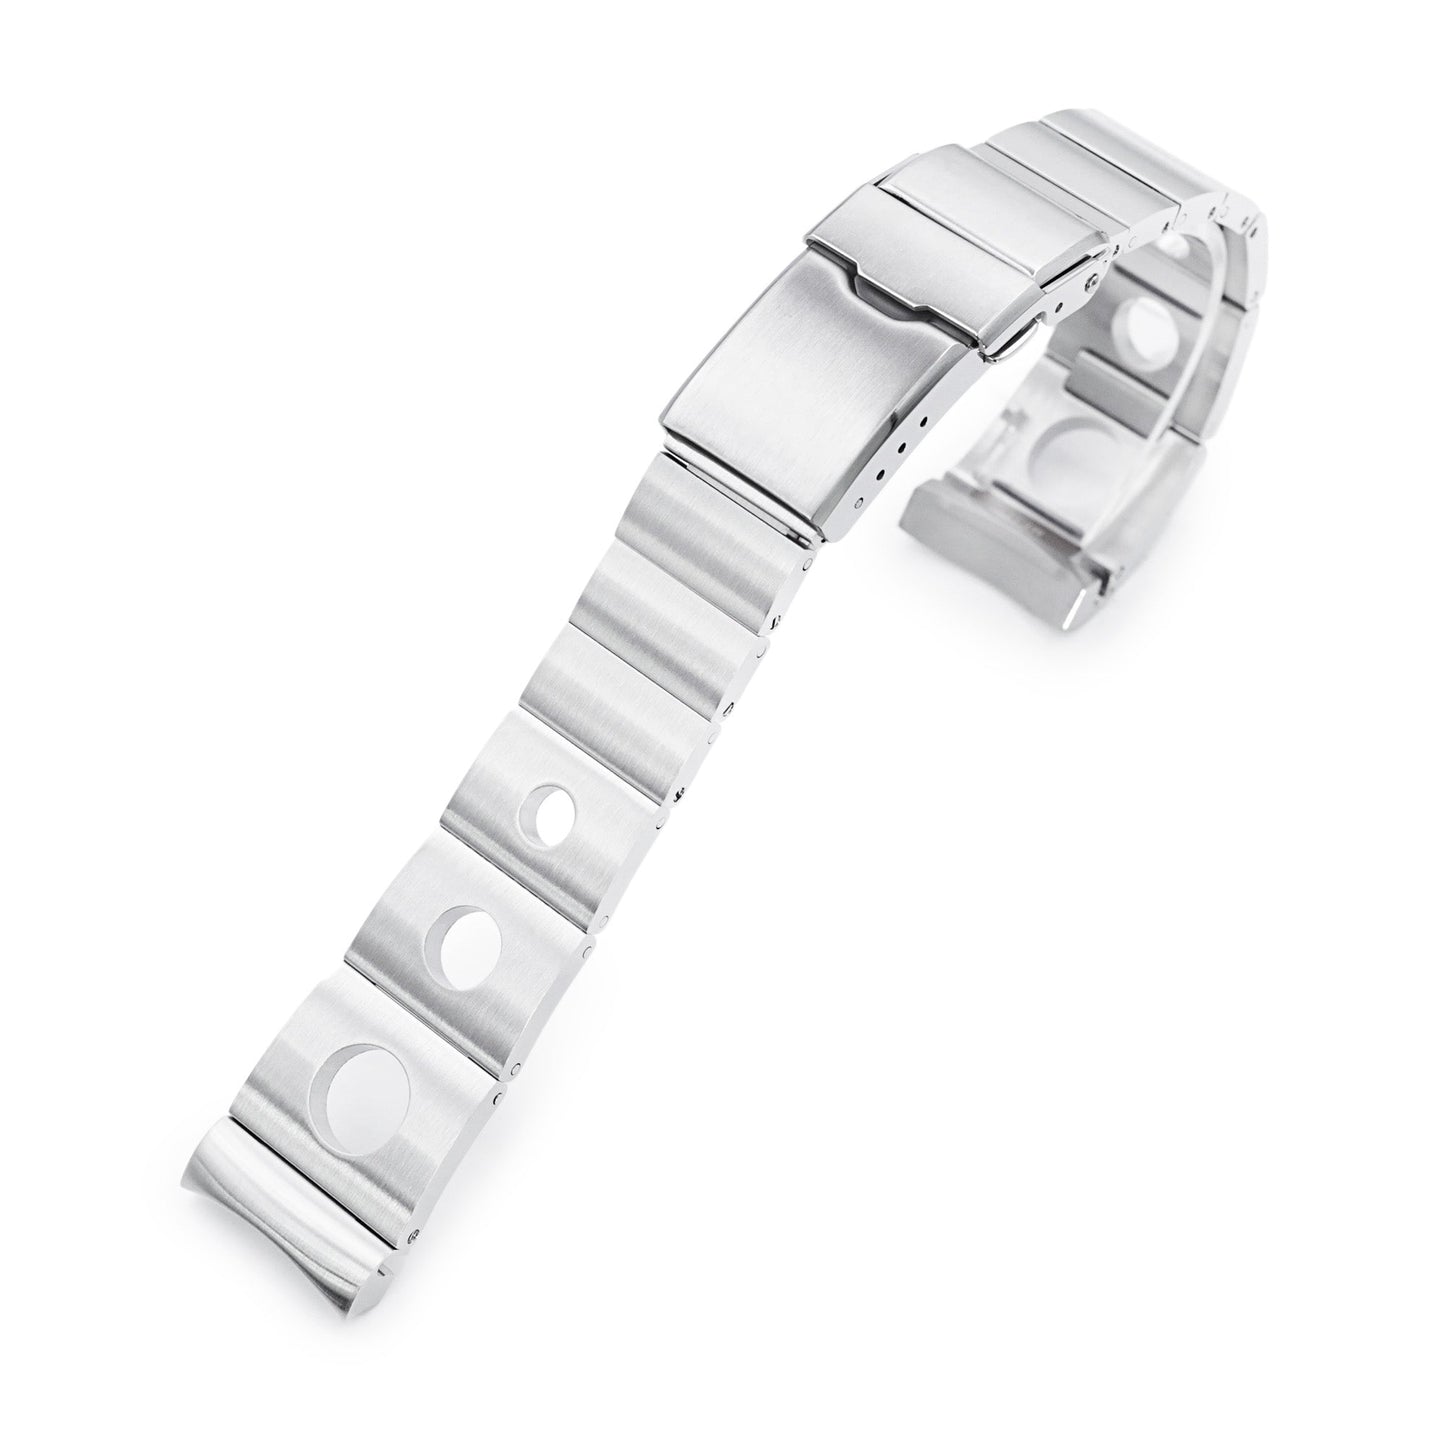 20mm Rollball version II Watch Band for Omega Seamaster 42mm, 316L Stainless Steel Brushed Baton Diver Clasp